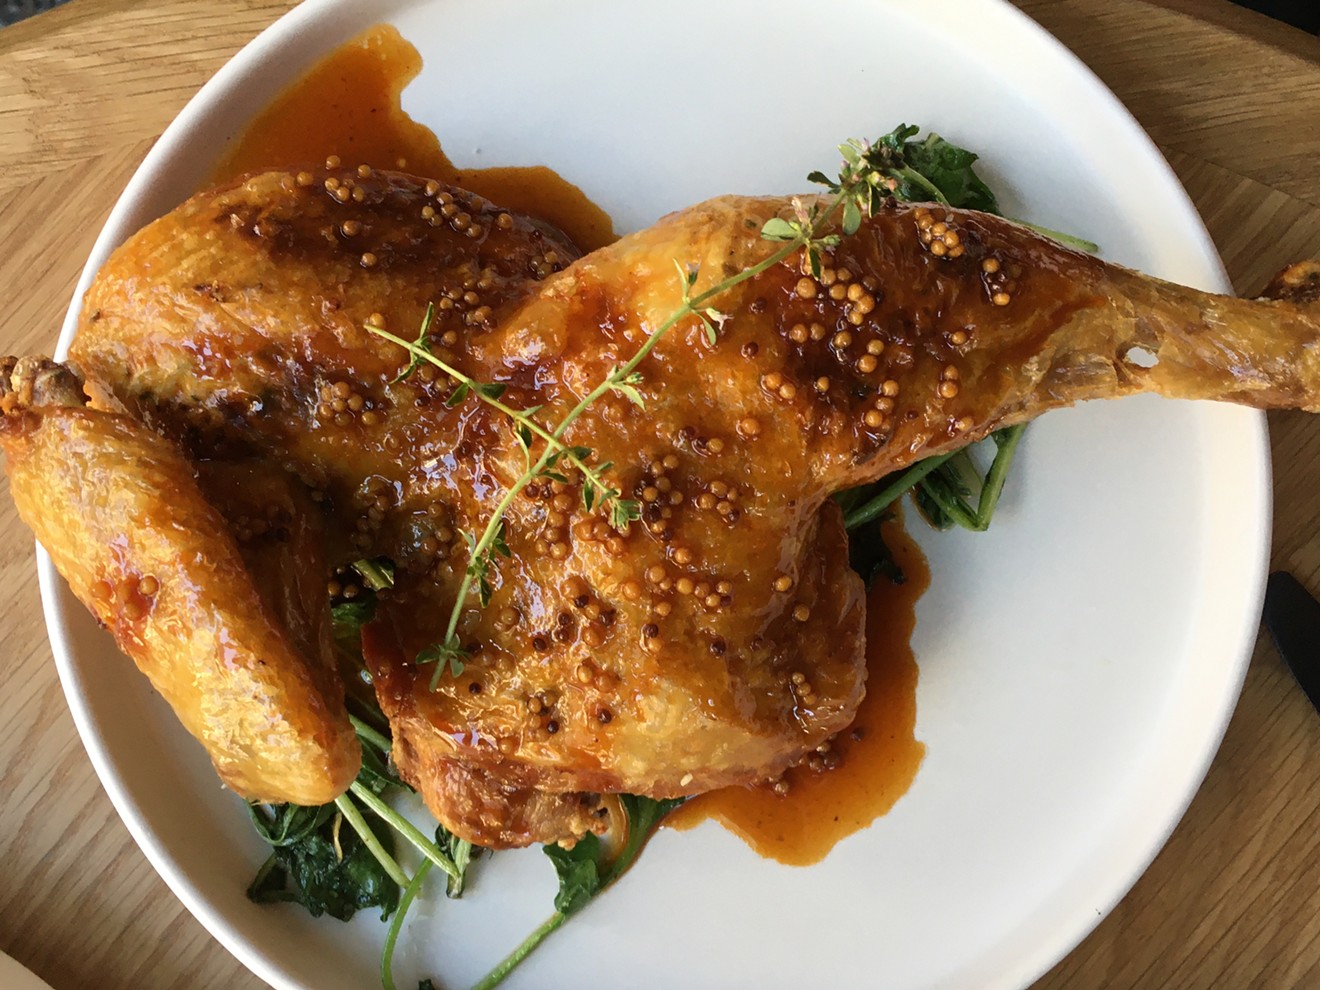 A roasted half chicken with Rebel Farm greens is a good representation of the menu at Local Jones.